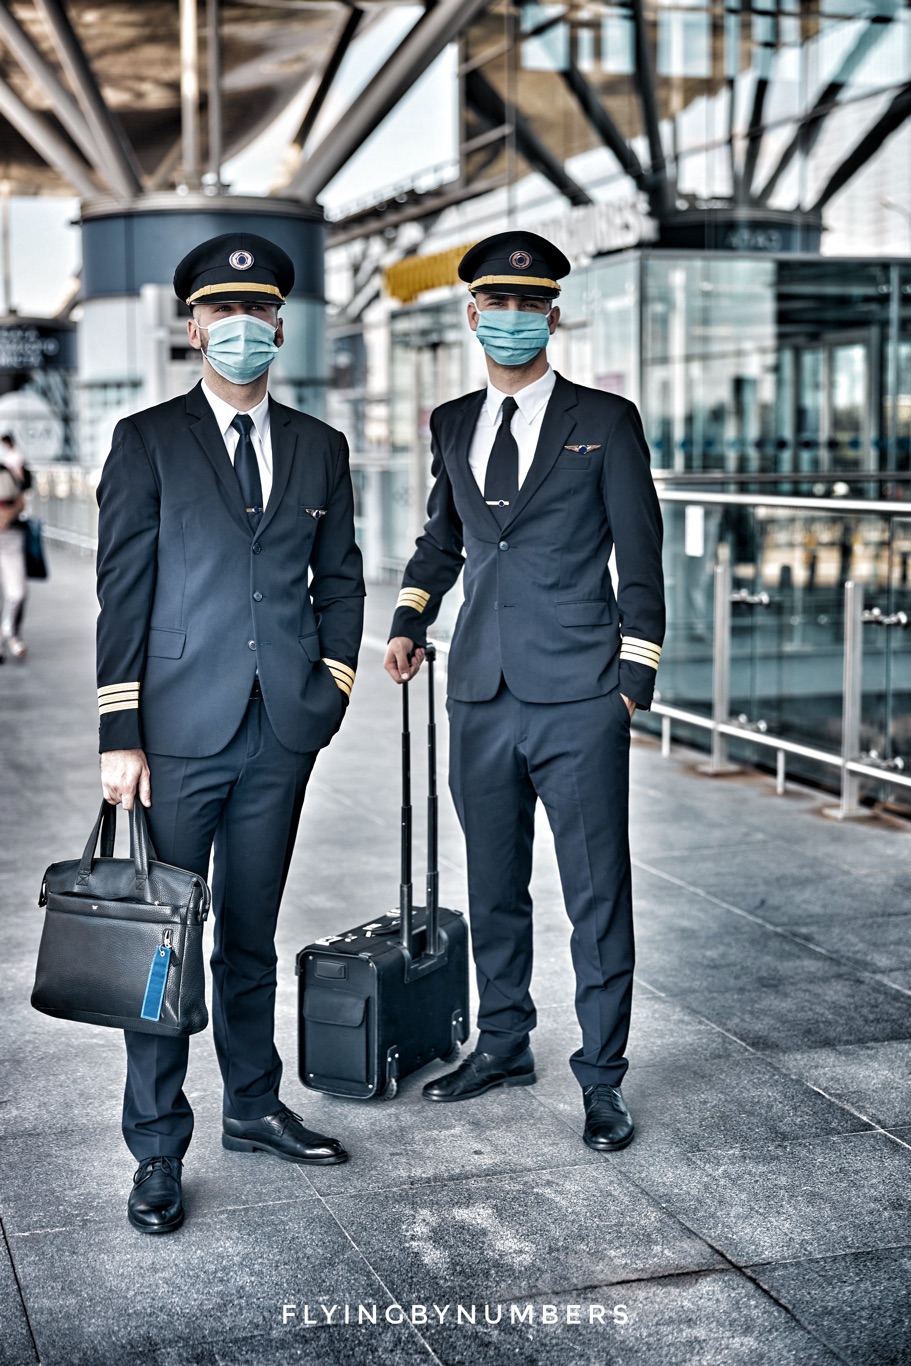 Two airline pilots wear masks during covid-19 downturn